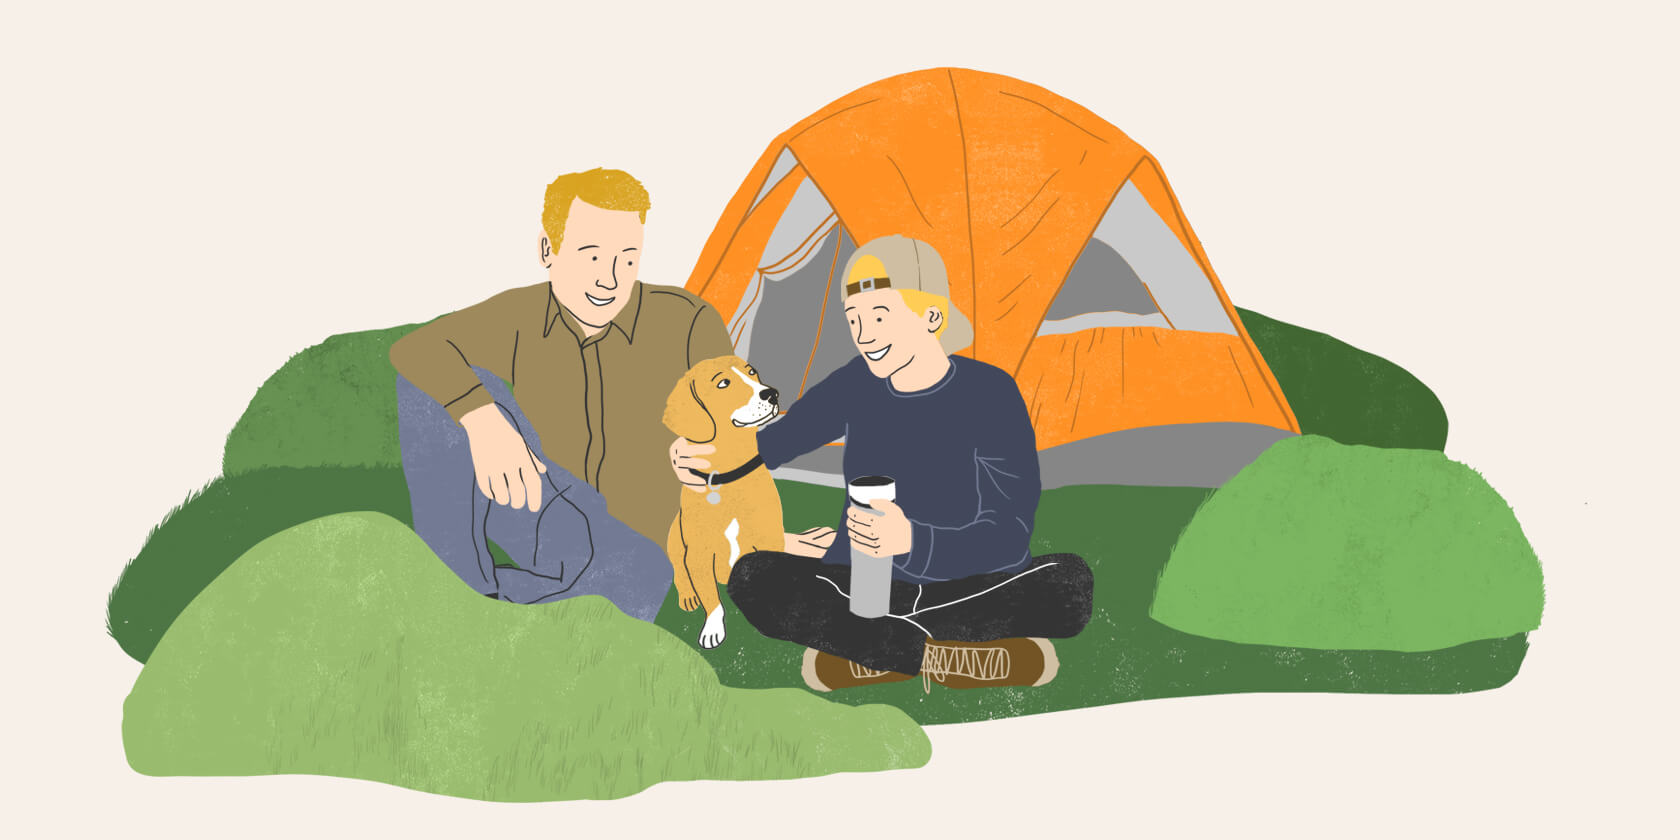 Owner and dog sitting at camping grounds